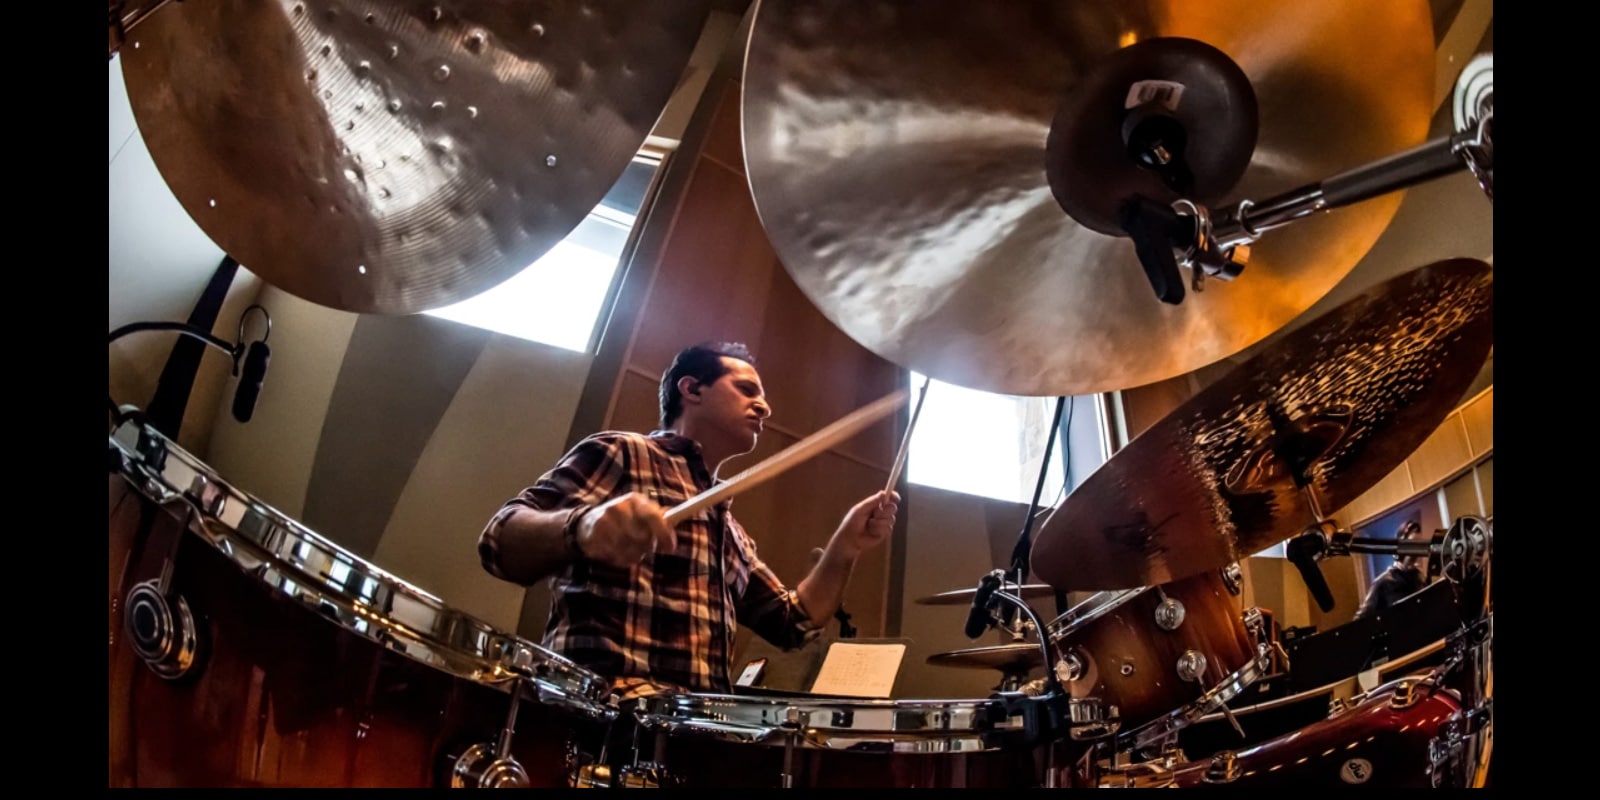 The Making of Nick D'Virgilio's Invisible at Sweetwater Studios